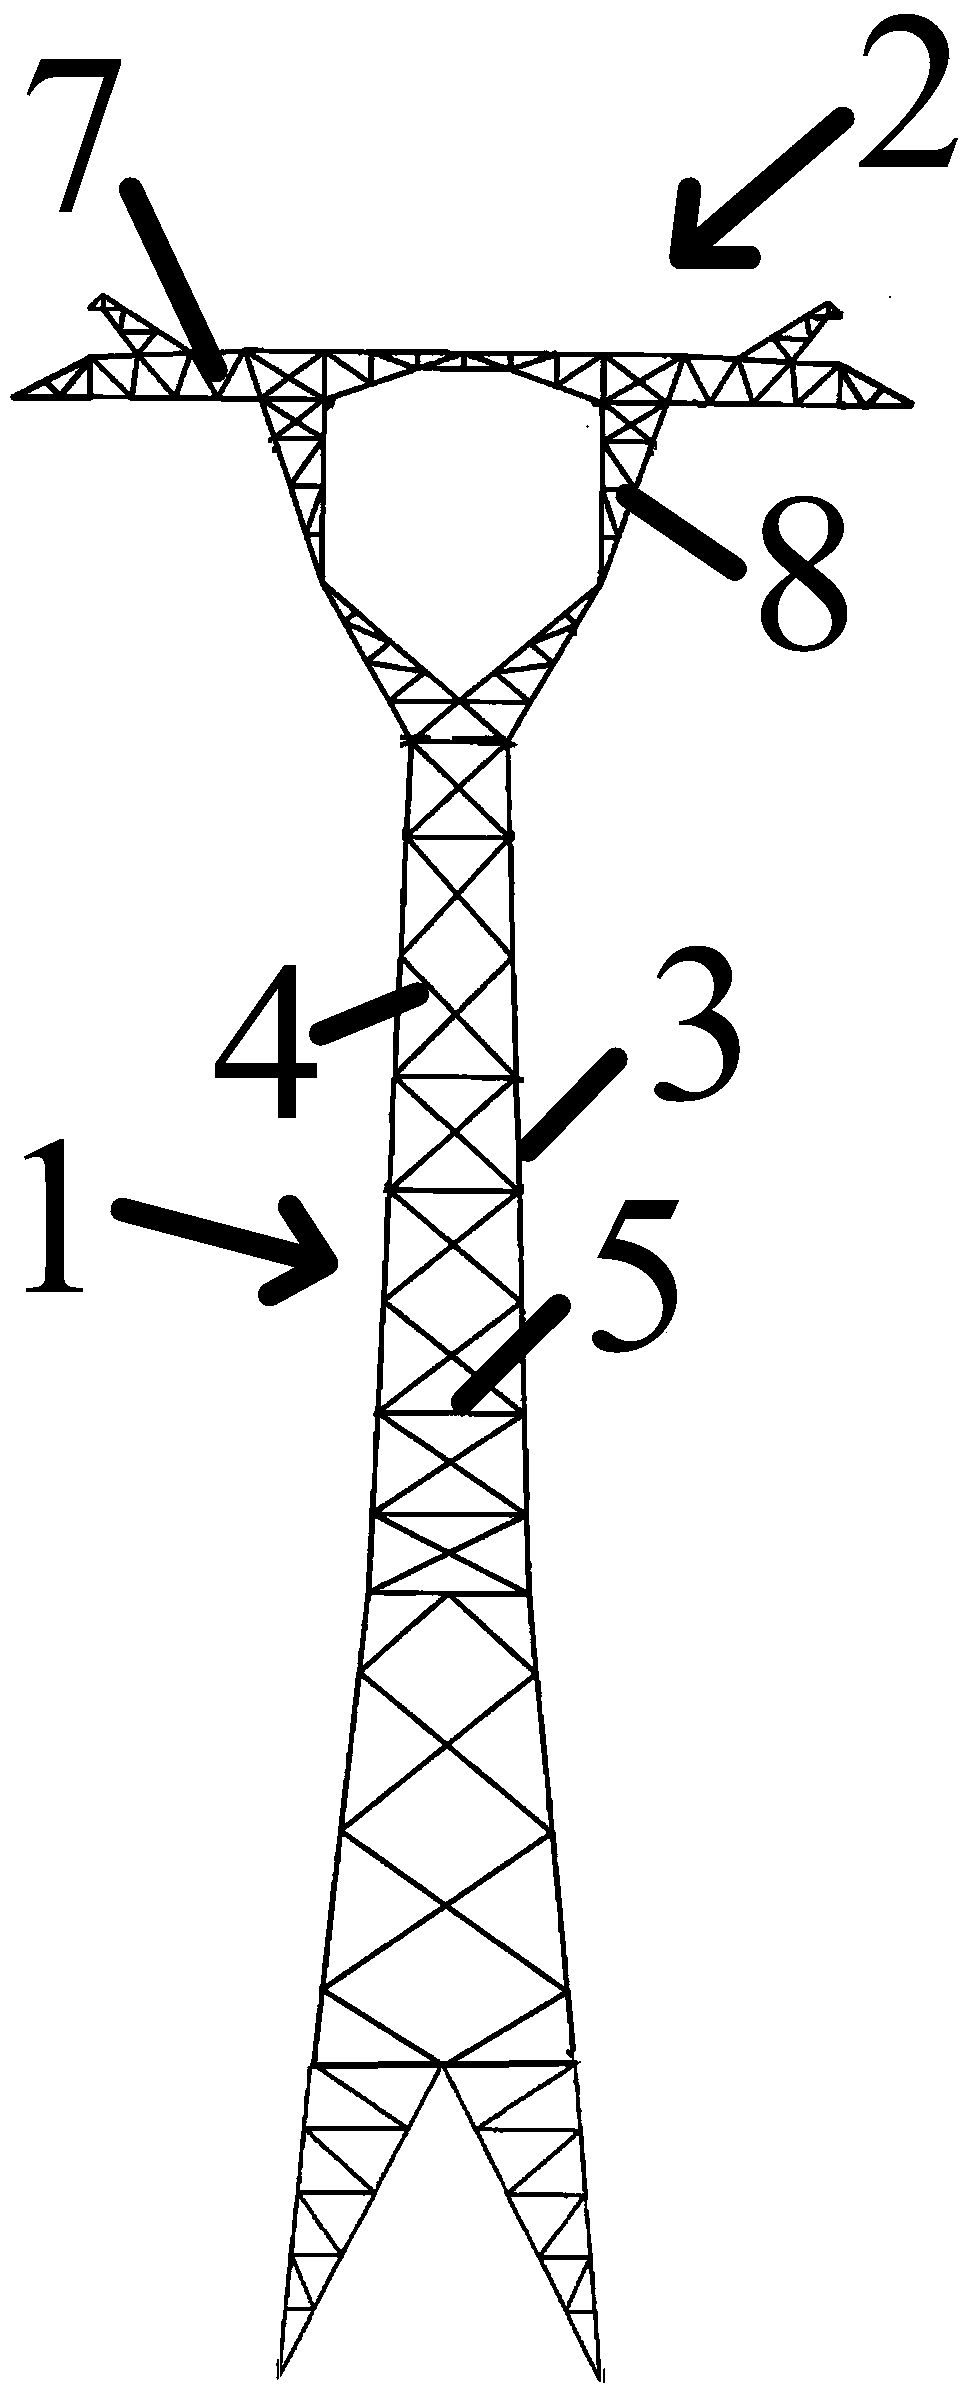 An aluminized steel transmission tower